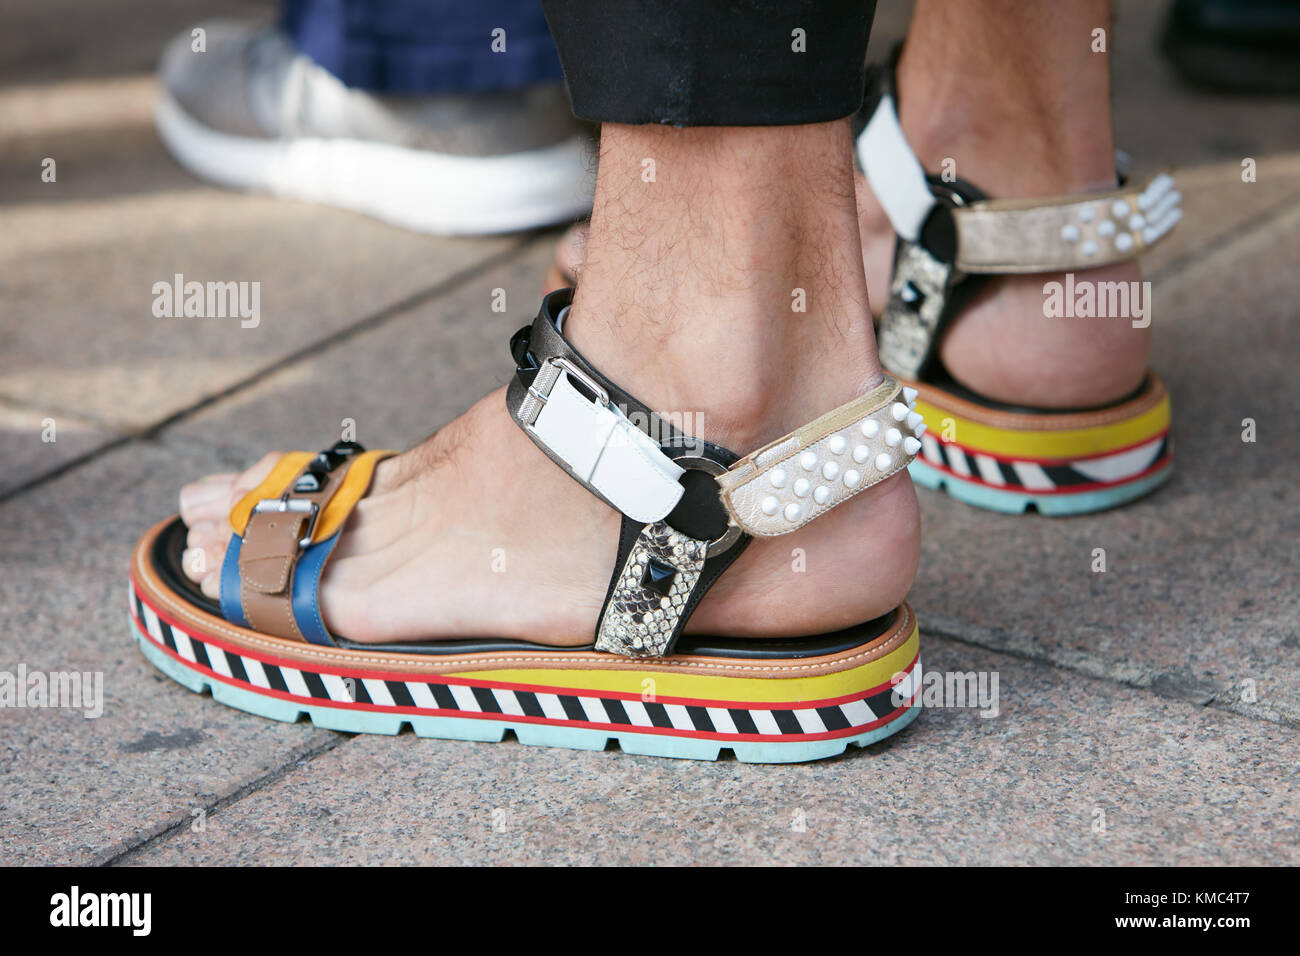 MILAN - SEPTEMBER 23: Man with colorful sandals before Gabriele Colangelo  fashion show, Milan Fashion Week street style on September 23, 2017 in  Milan Stock Photo - Alamy